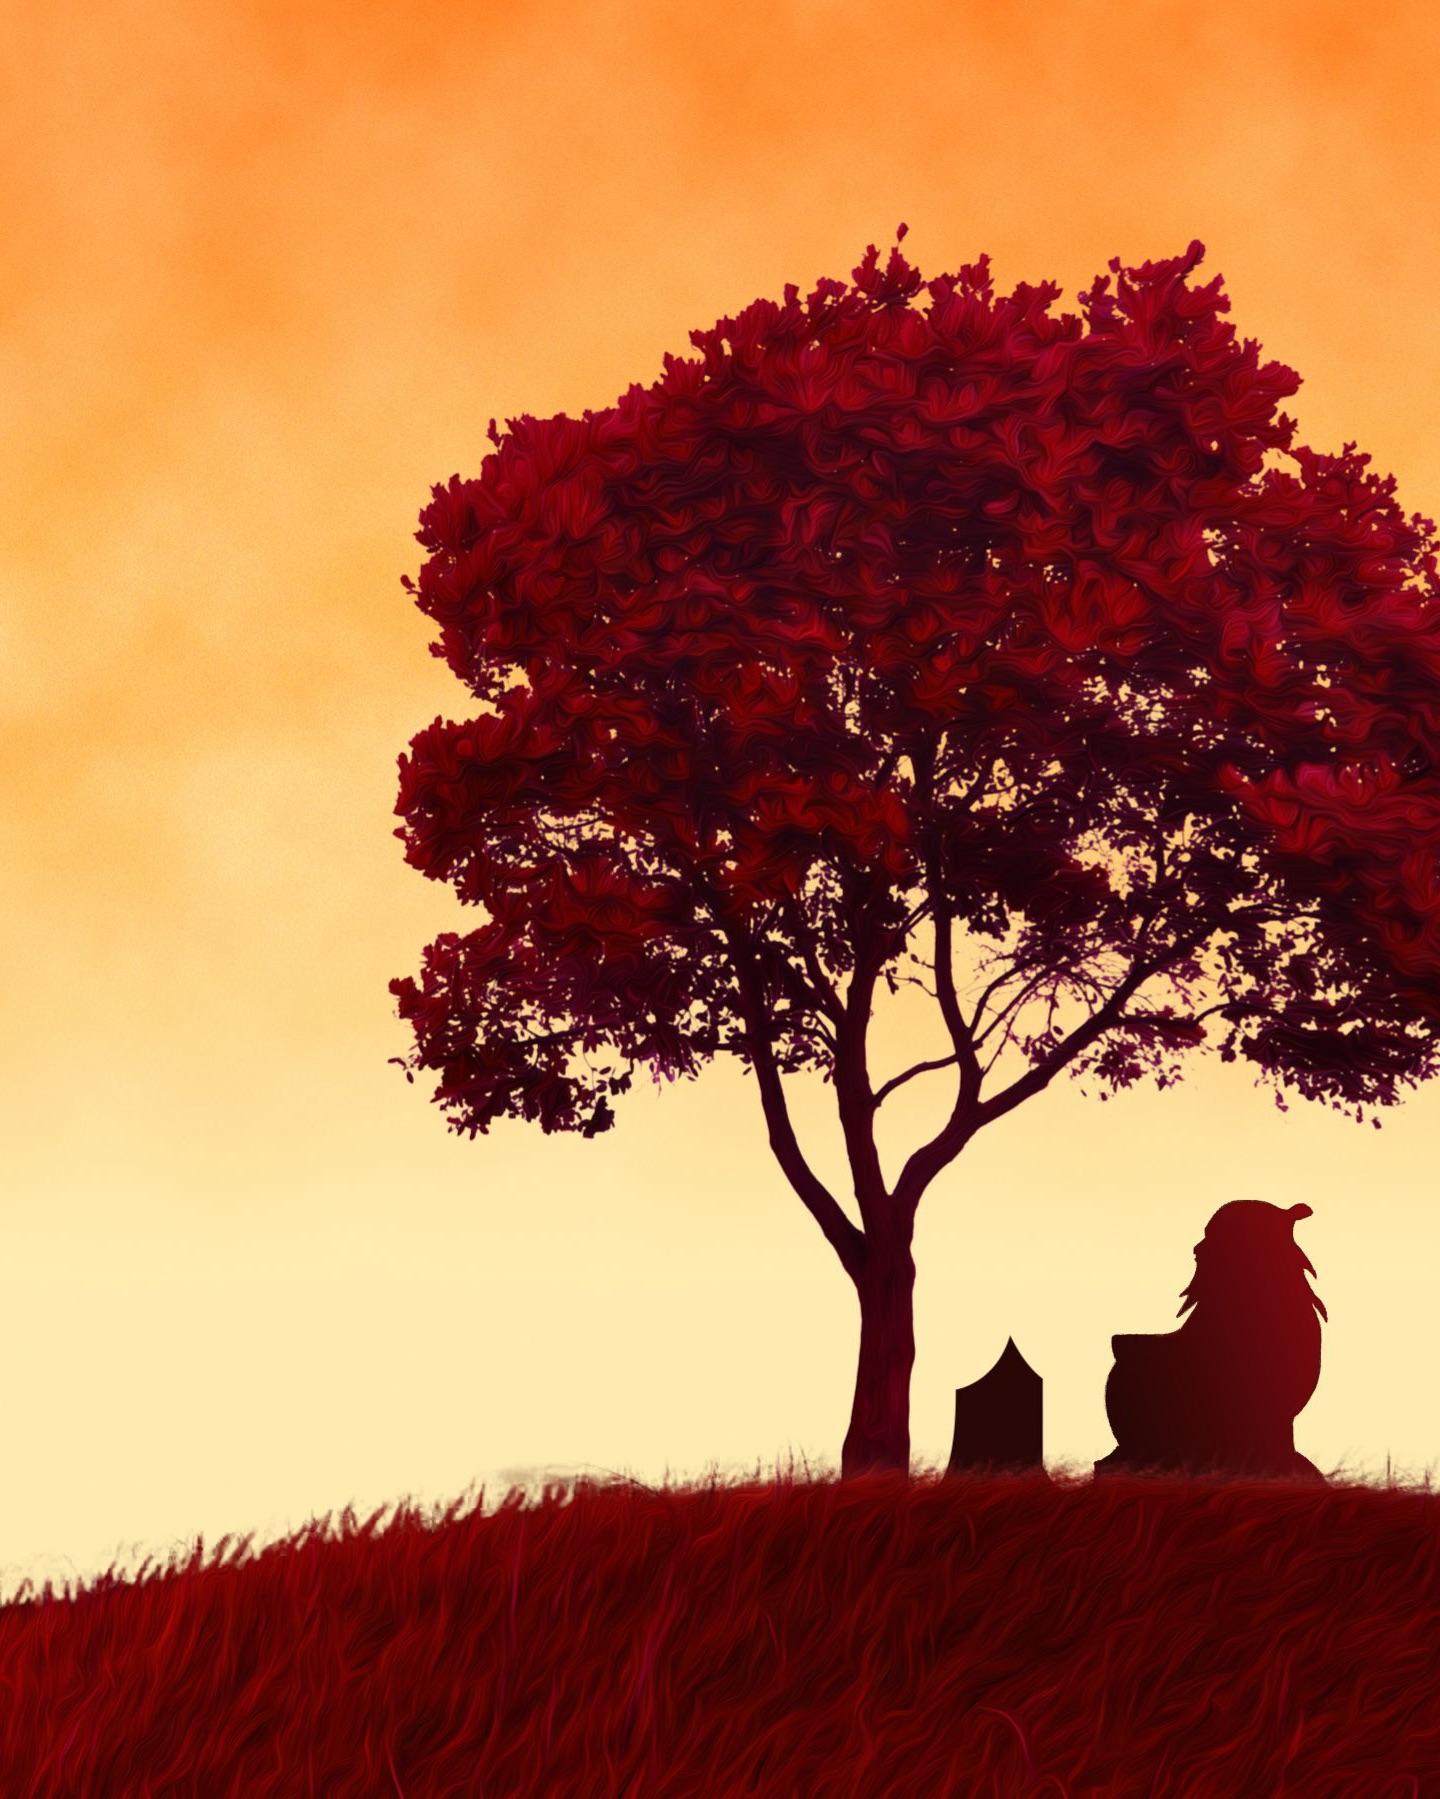 Saw this awesome Iroh picture. Could anyone handy with photo editing possibly resize this for an iPhone XR wallpaper? It would be greatly appreciated